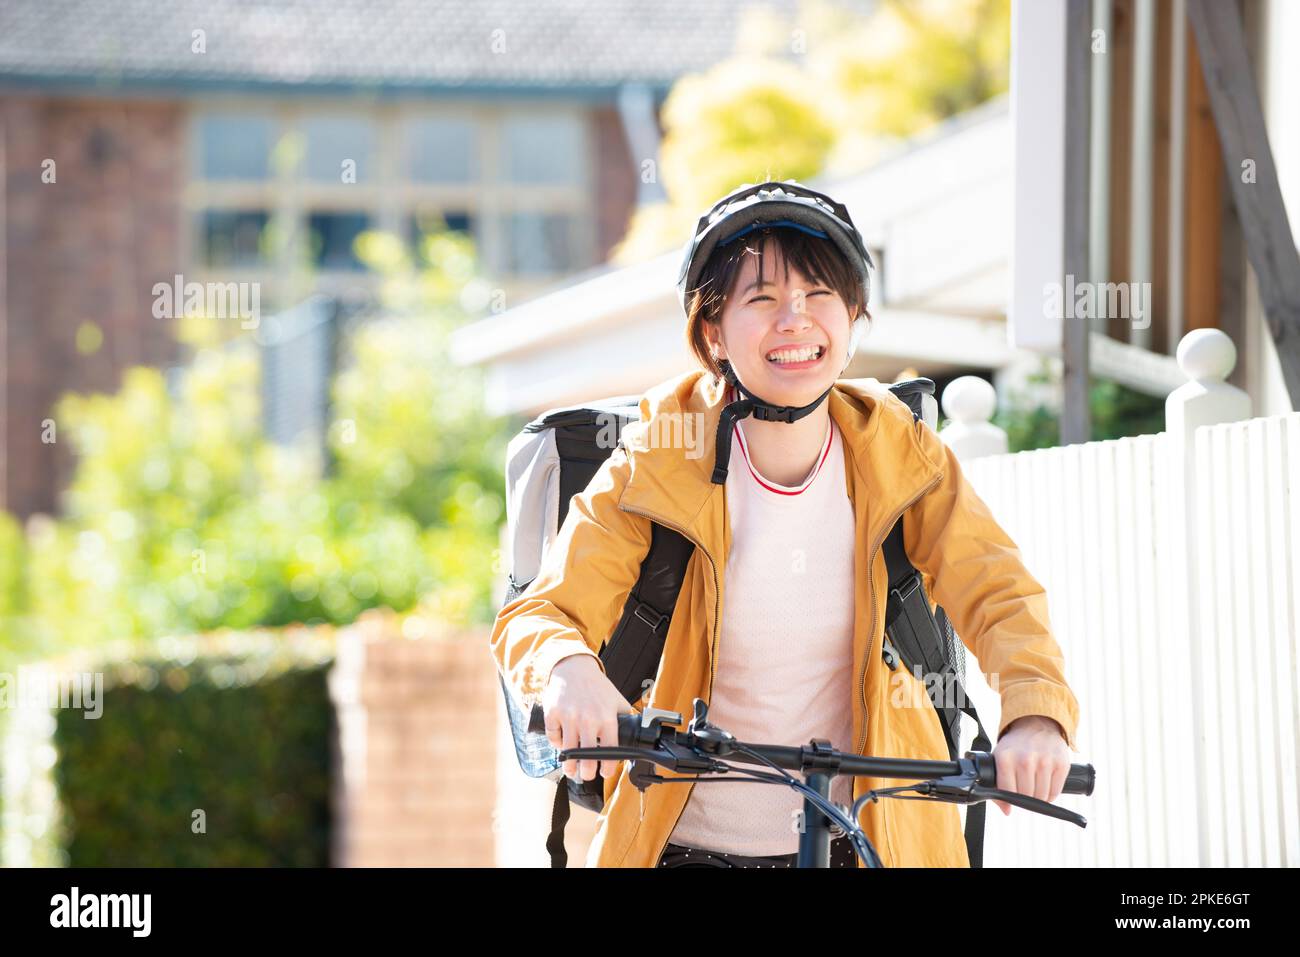 Food Delivery Woman on a Bicycle Stock Photo